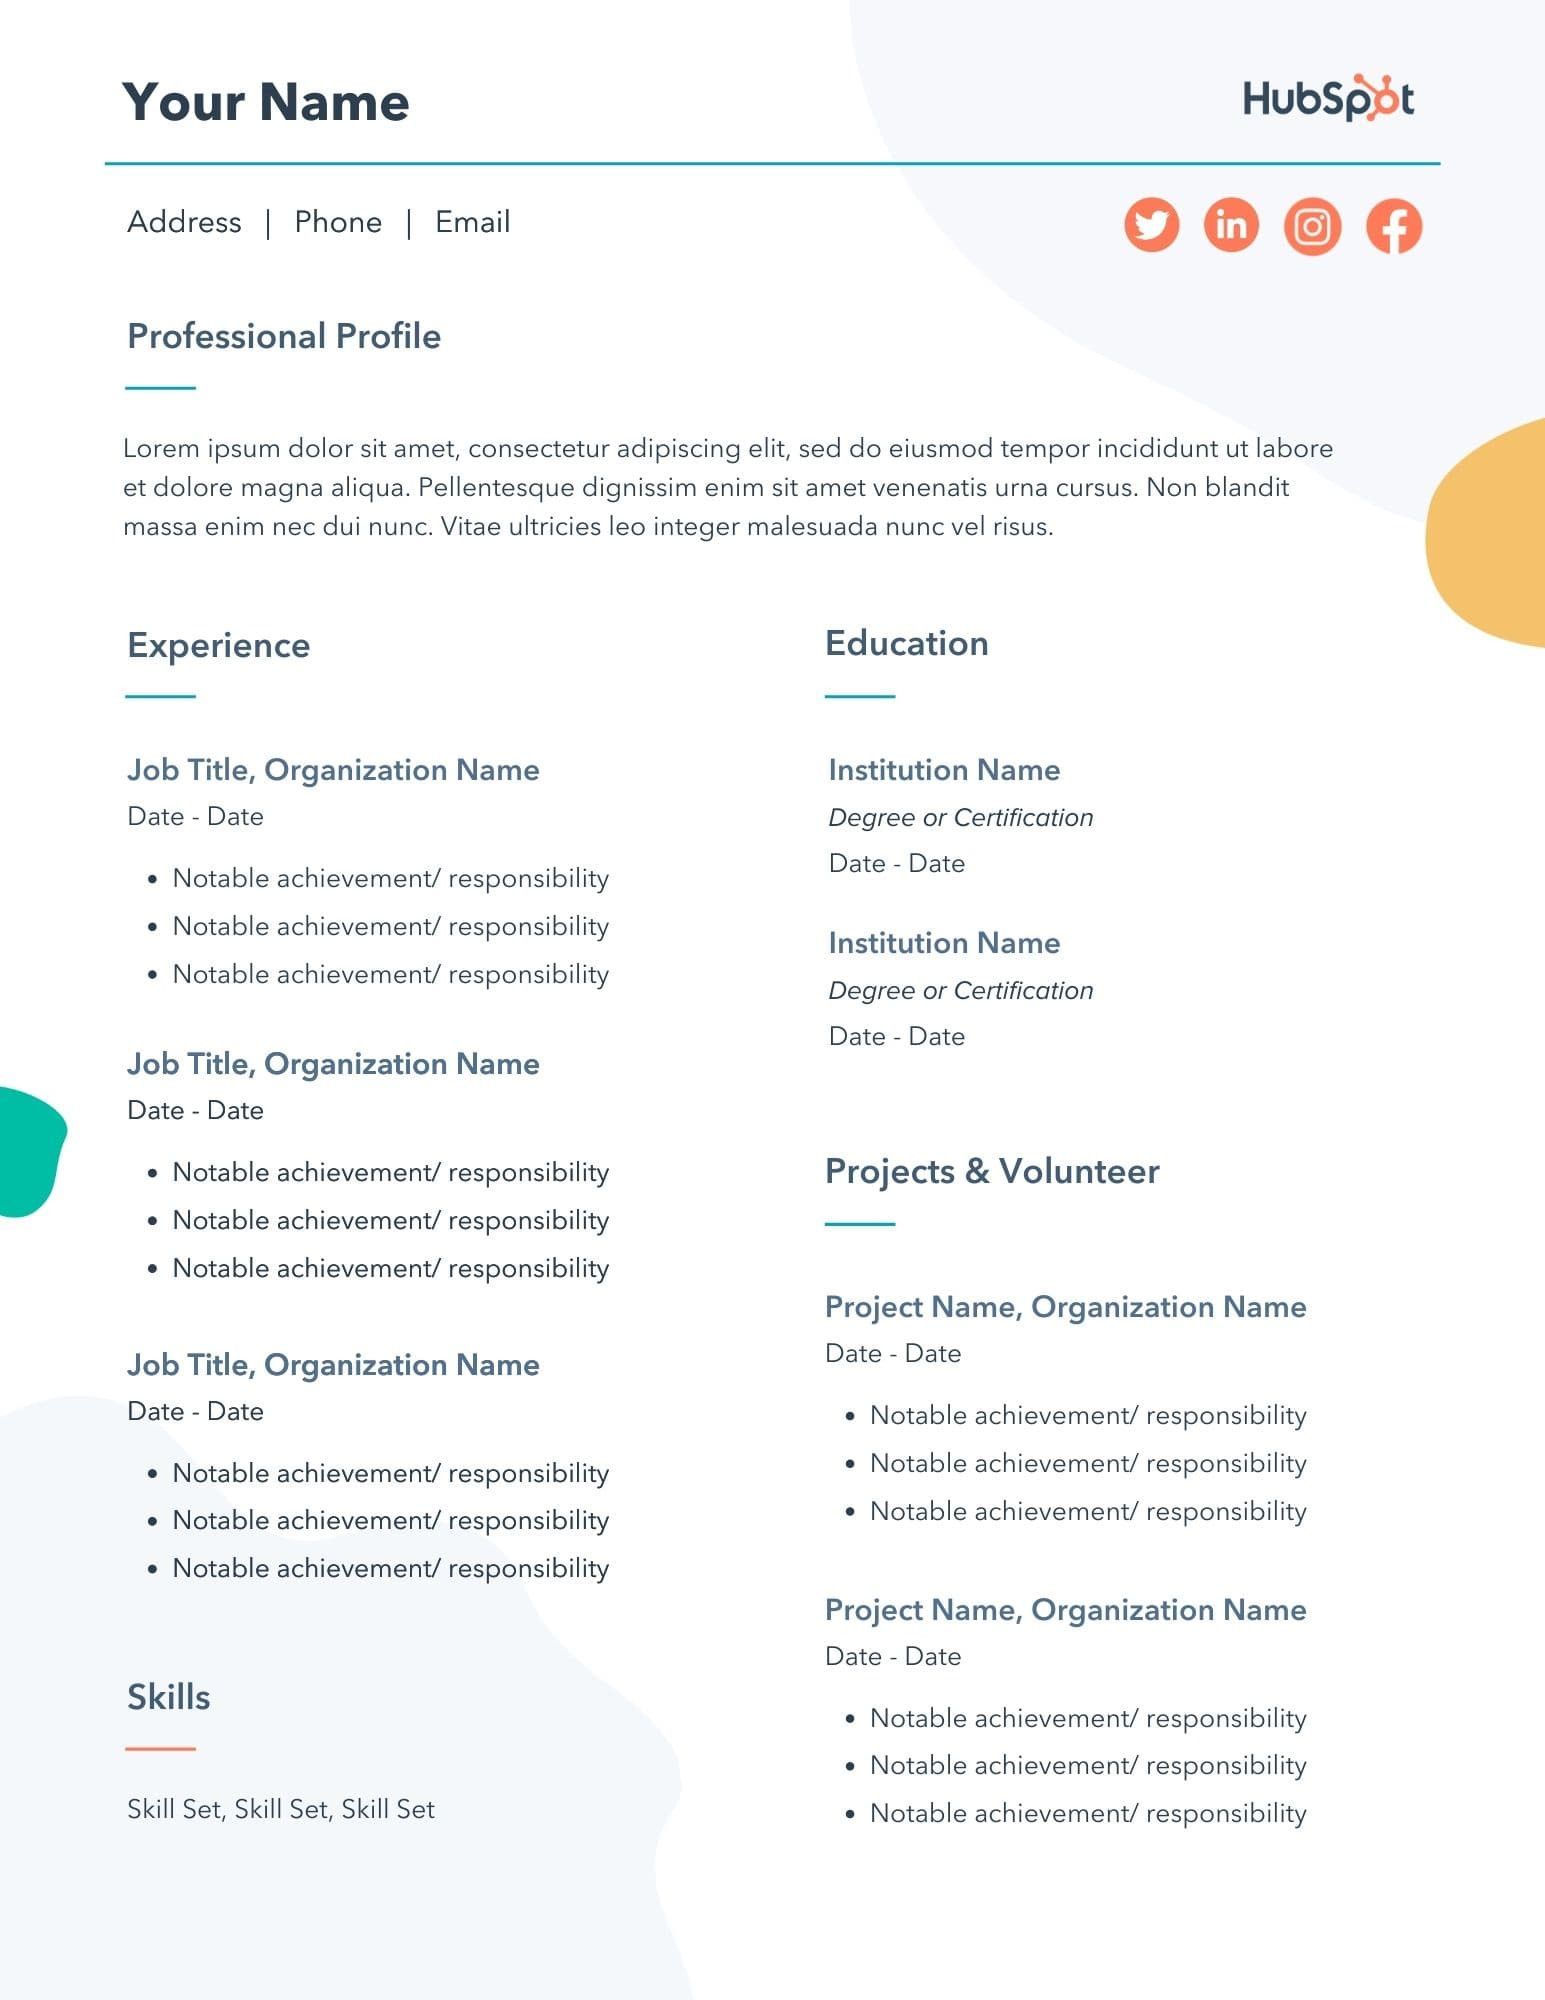 Free Resume Template with Skills Section 29 Free Resume Templates for Microsoft Word (& How to Make Your Own)